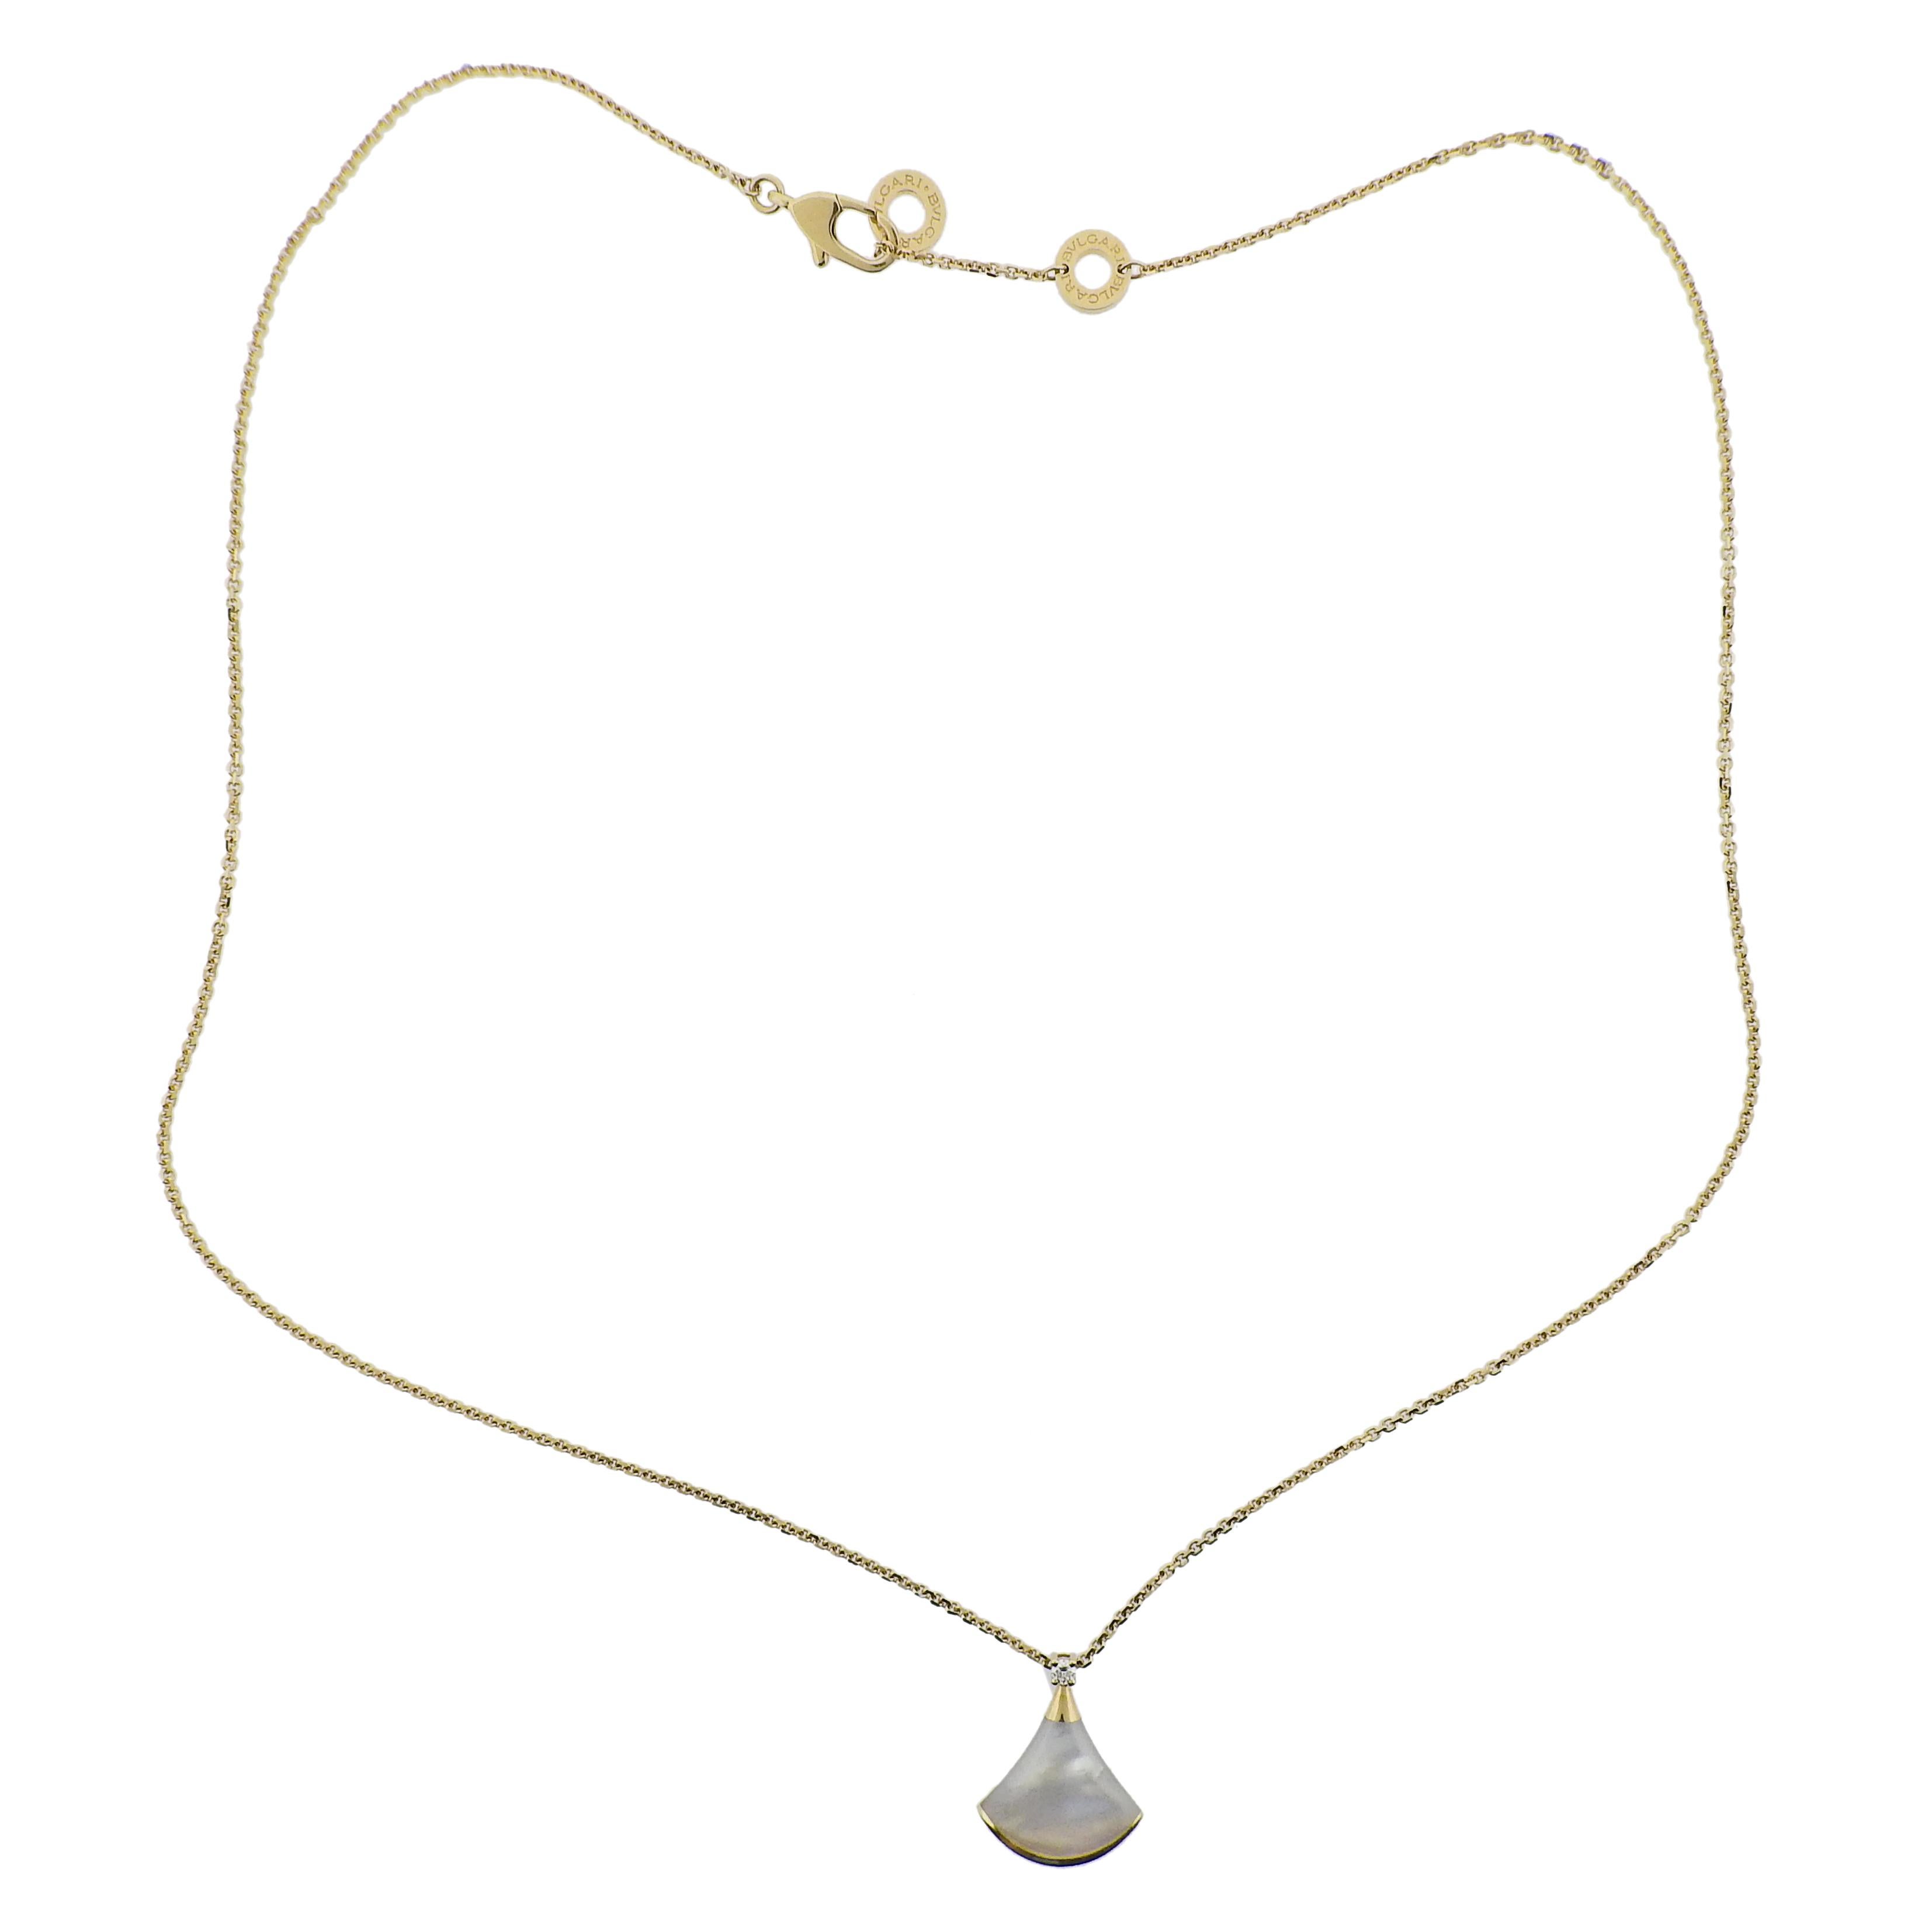 18k yellow gold Bvlgari Diva's Dream pendant necklace, with mother of pearl and 0.02ct G/VS diamond. Retail $2130. Comes with COA and box. Necklace is 17.25